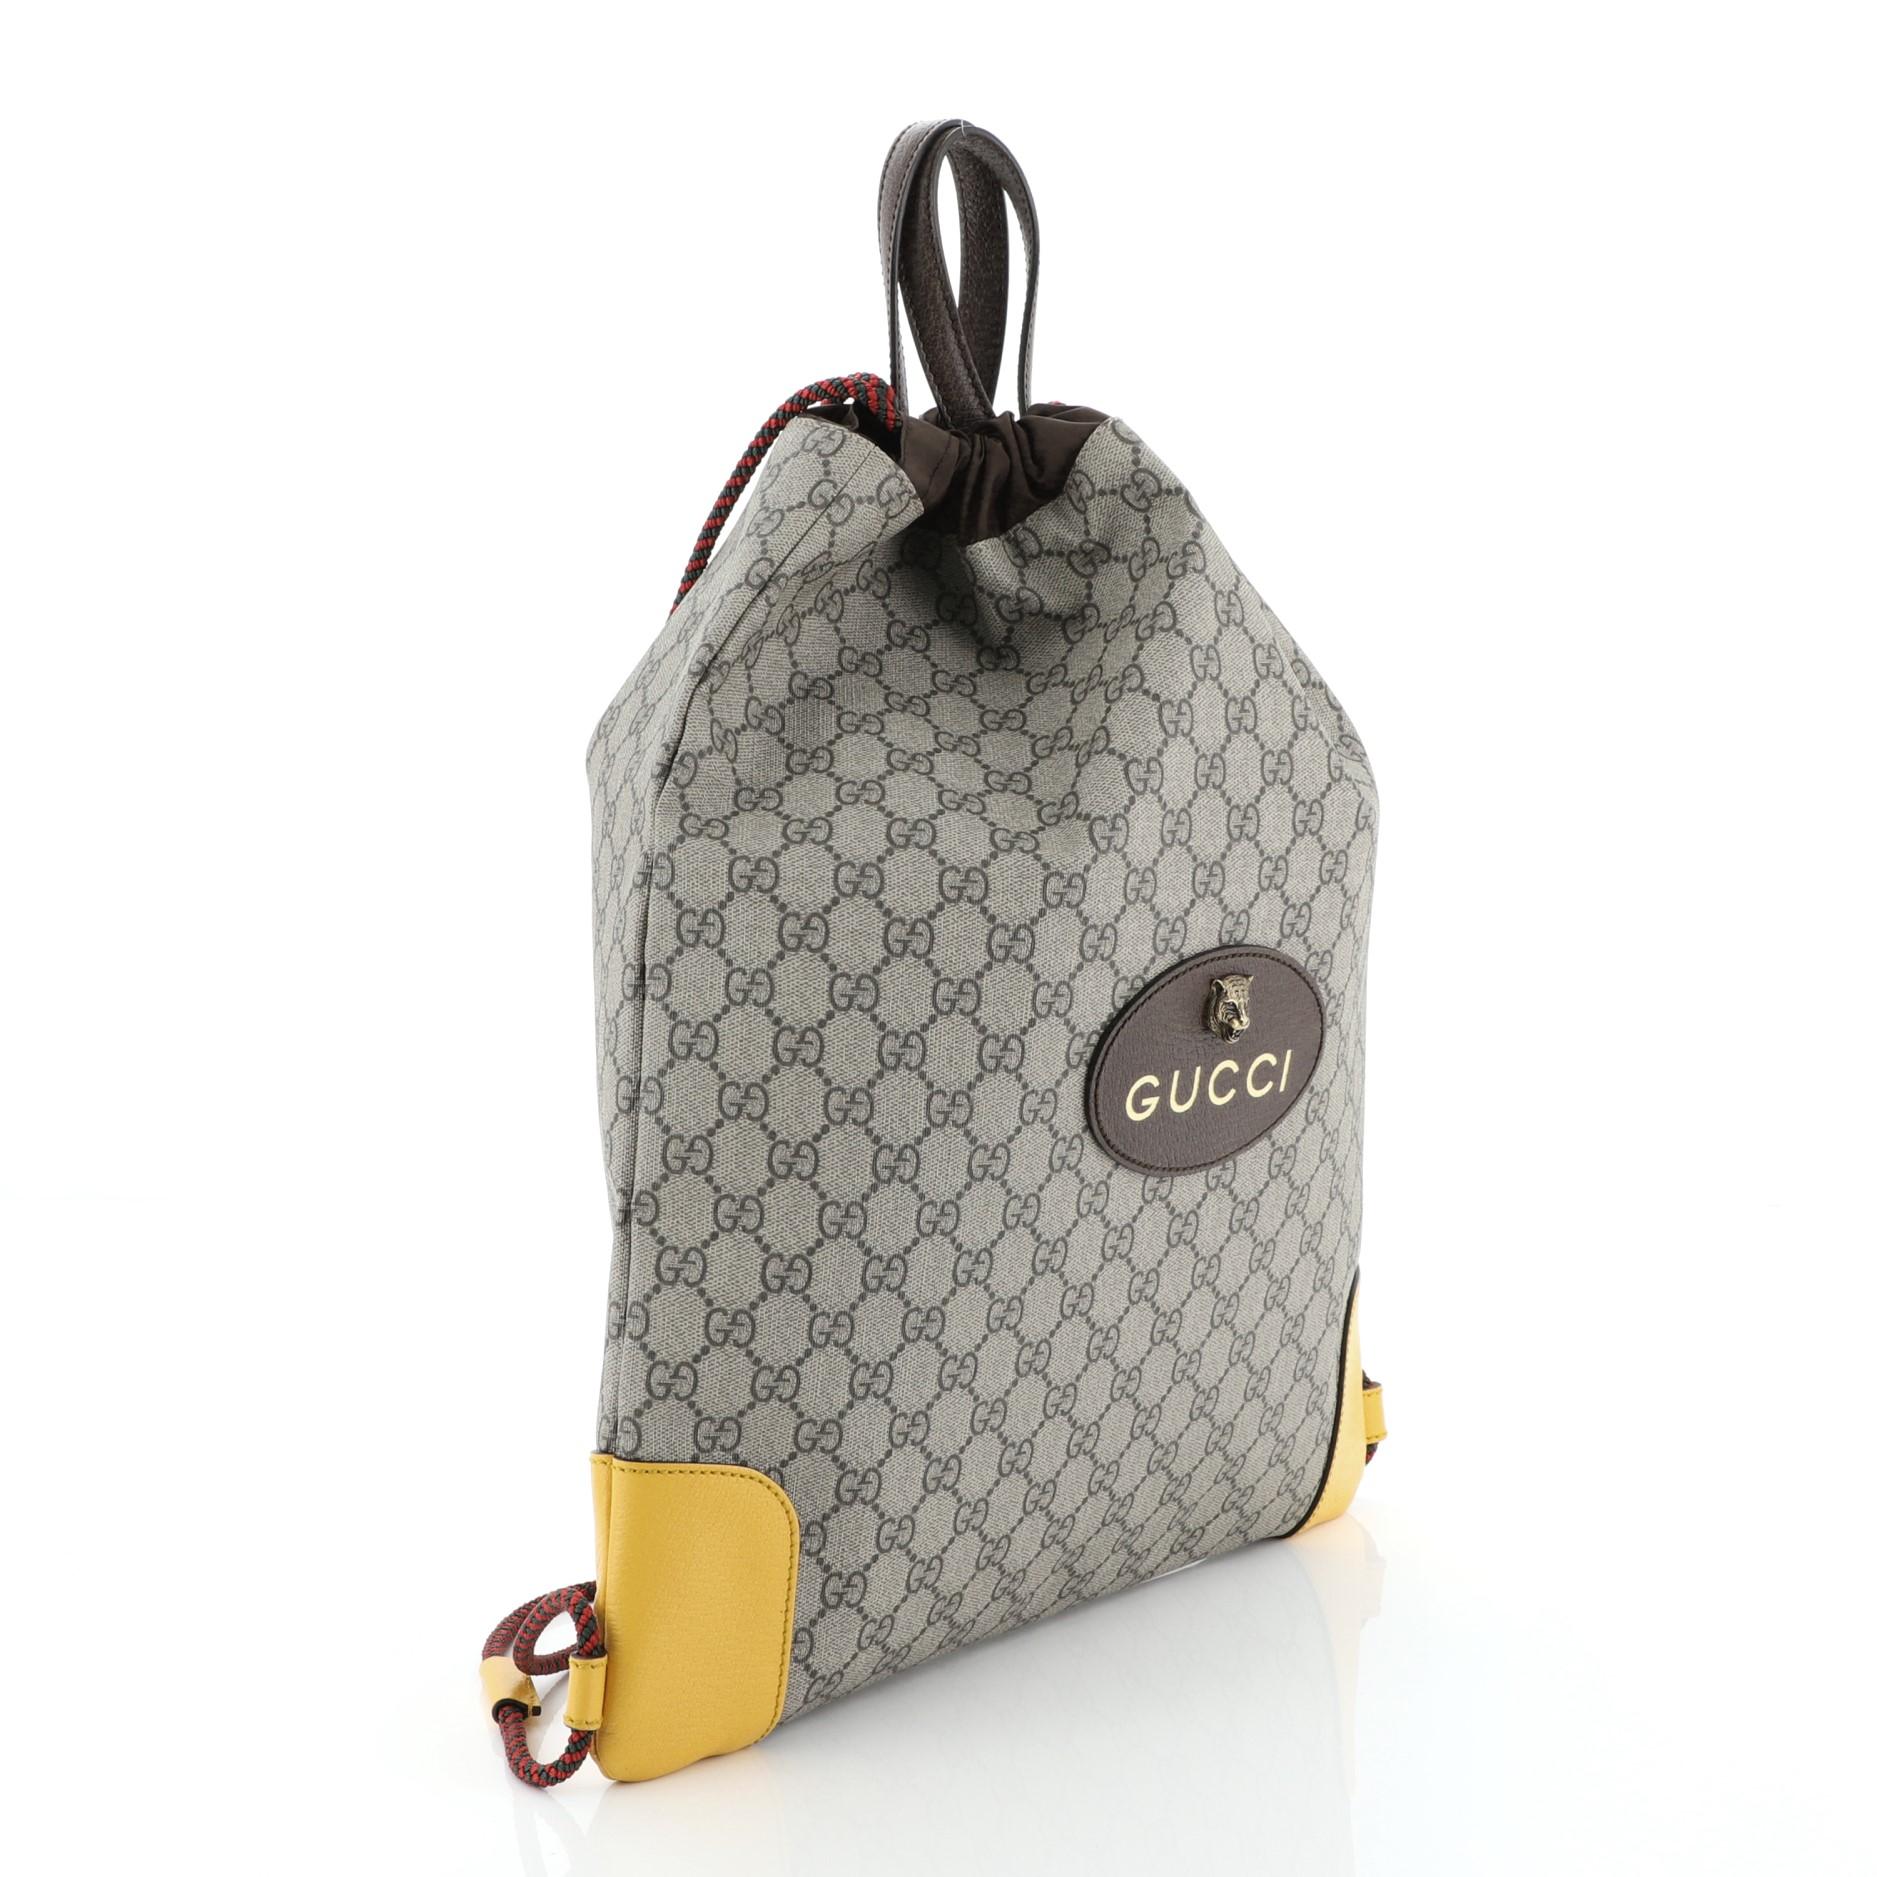 This Gucci Animalier Drawstring Backpack GG Coated Canvas Large, crafted from brown GG coated canvas, features dual top handle, rope straps that double function as drawstring, and aged gold-tone hardware. Its drawstring closure opens to a brown